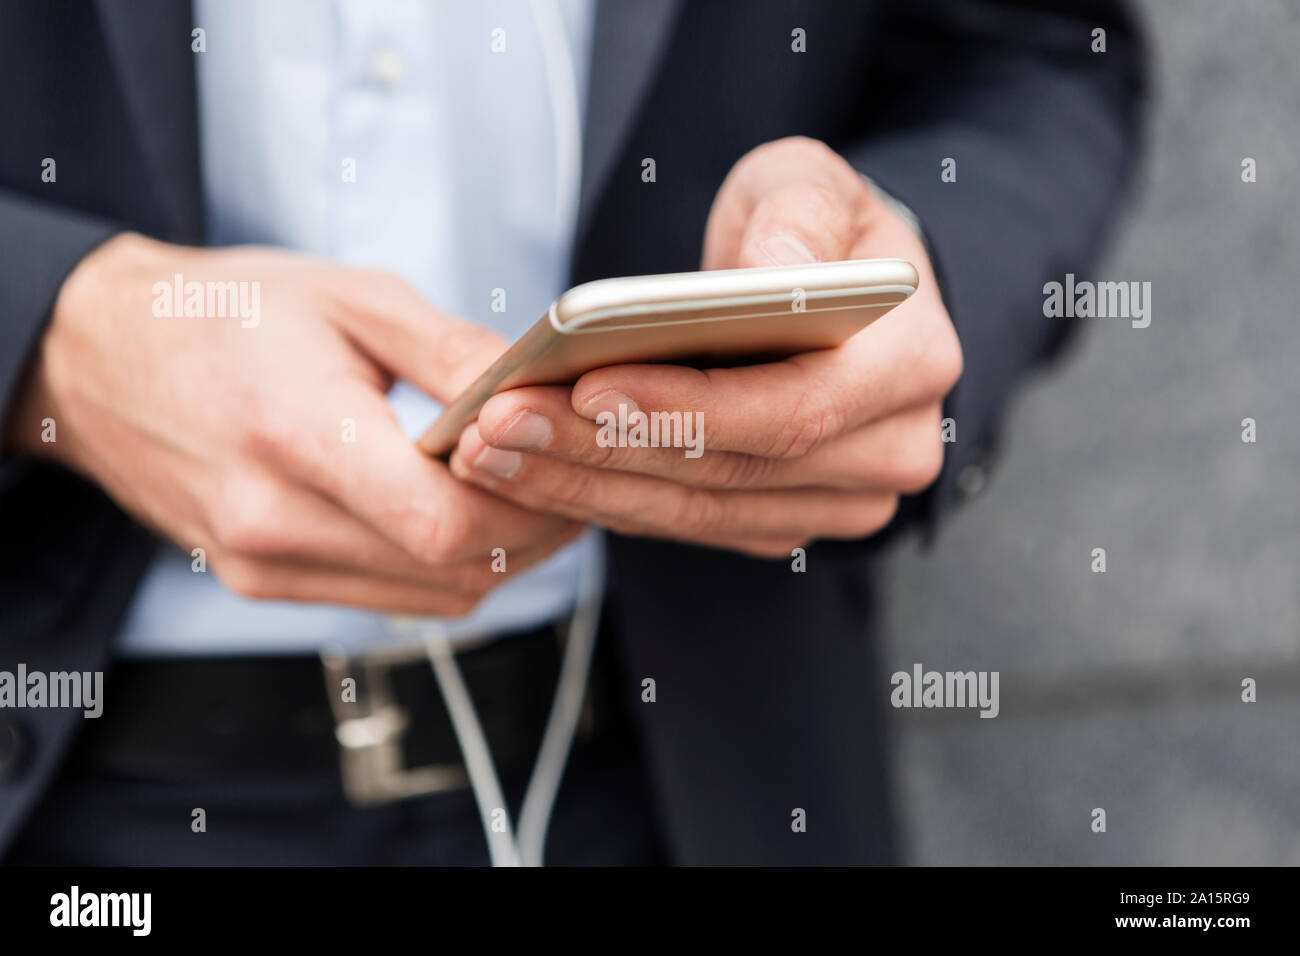 Hands of businessman holding mobile phone, close-up Stock Photo